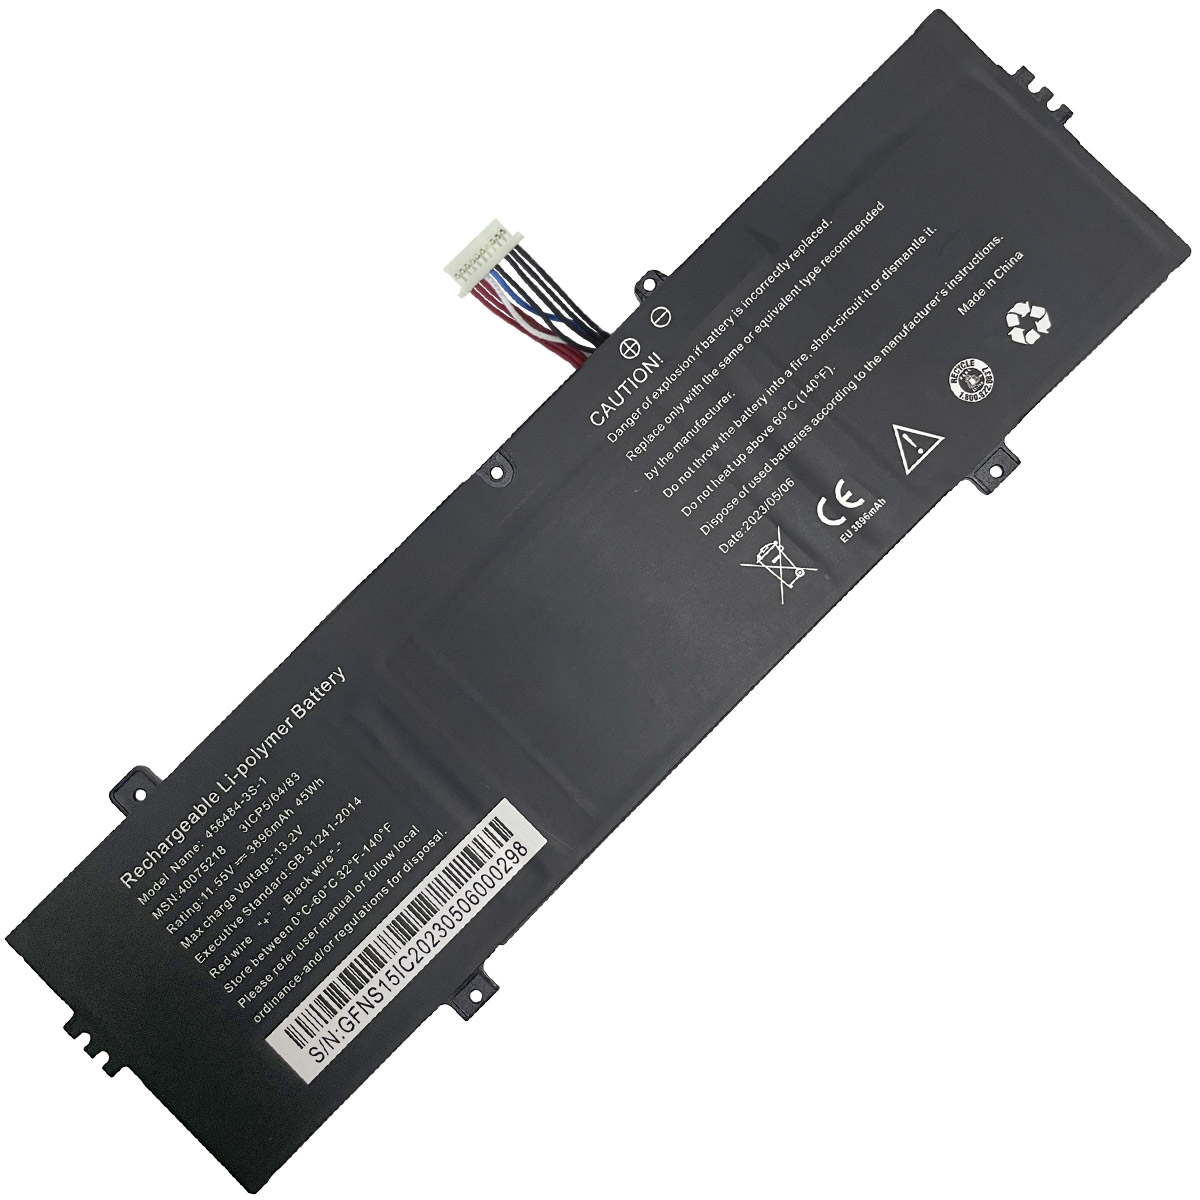 MEDION-456484-3S-1(9Lines)-Laptop Replacement Battery